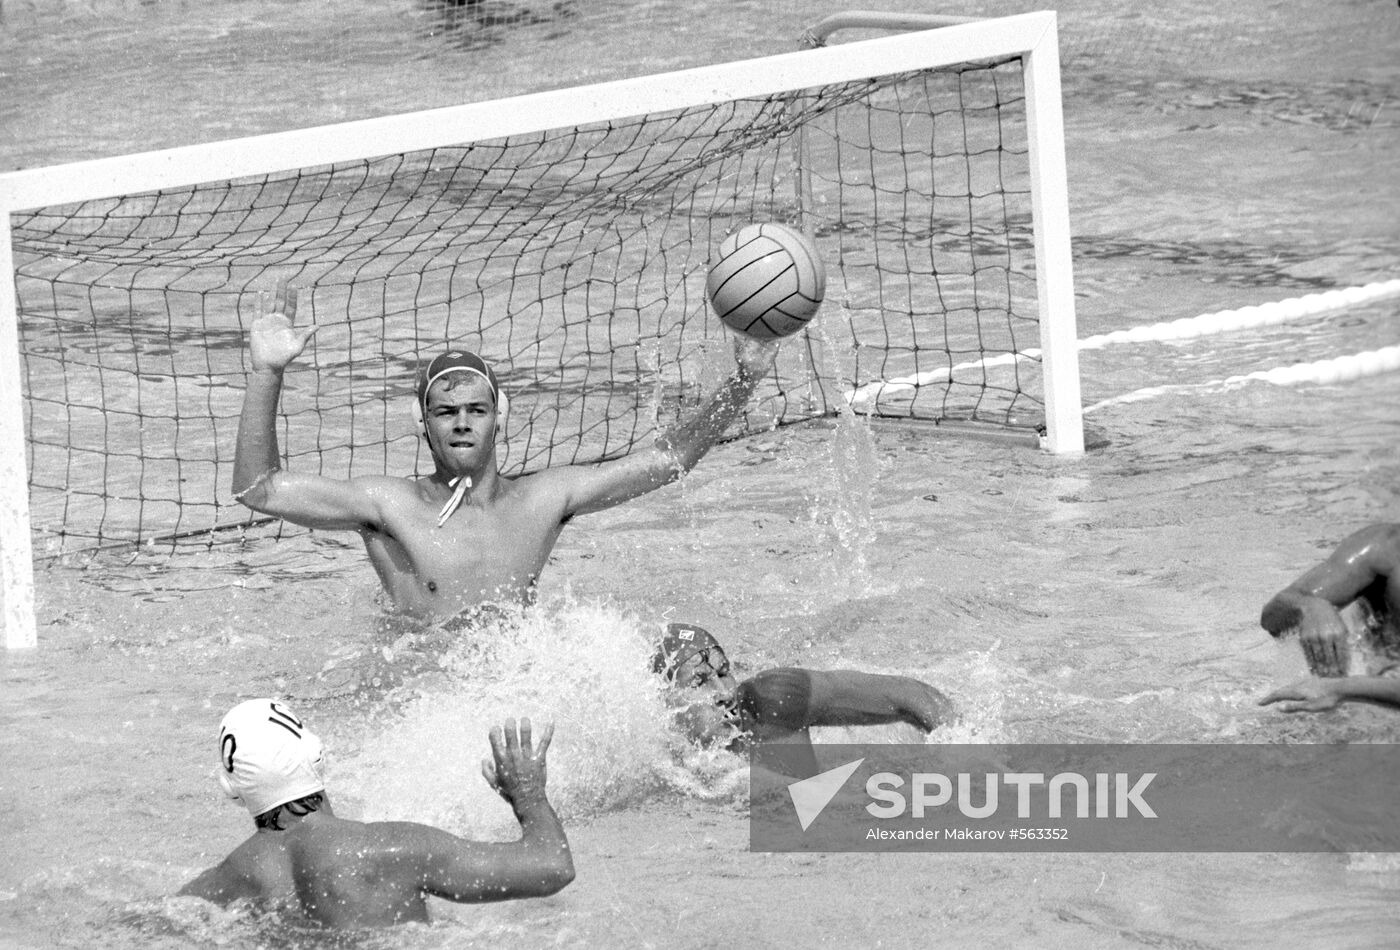 Water polo match between Sweden and Greece